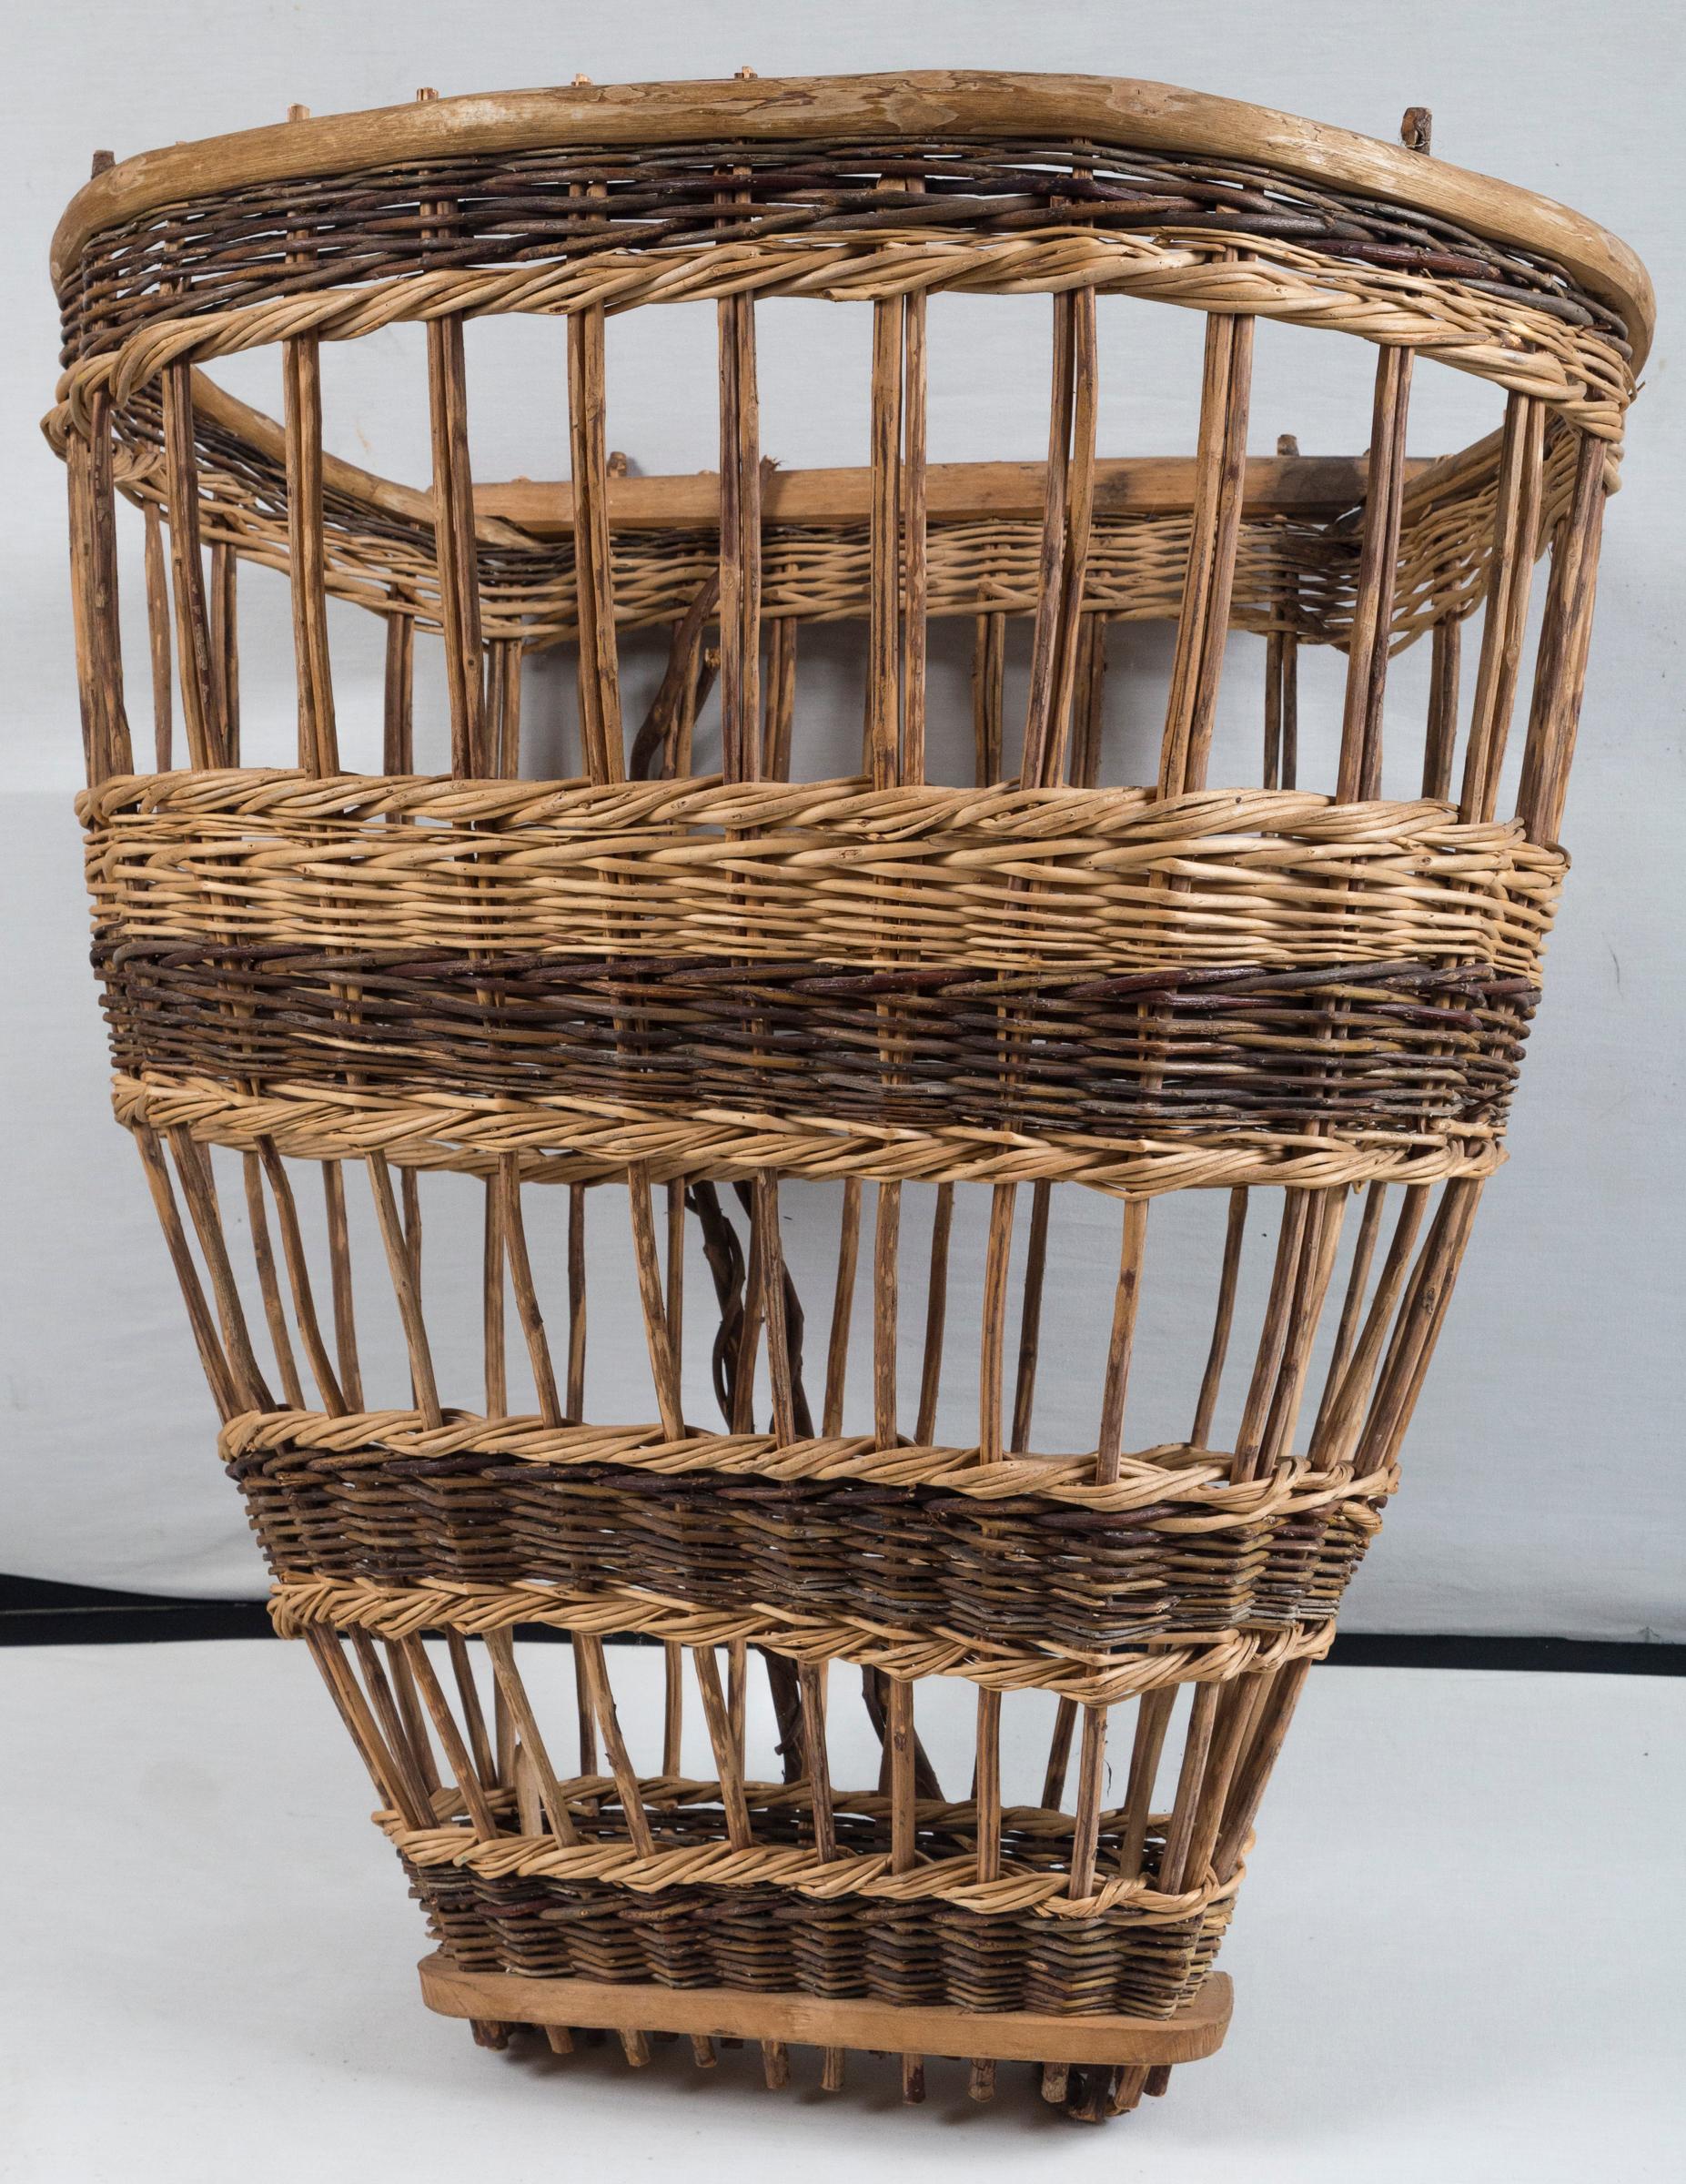 Vintage European field basket, 20th century. Woven wicker and wood. Used for hand-harvesting and designed to be worn on back.